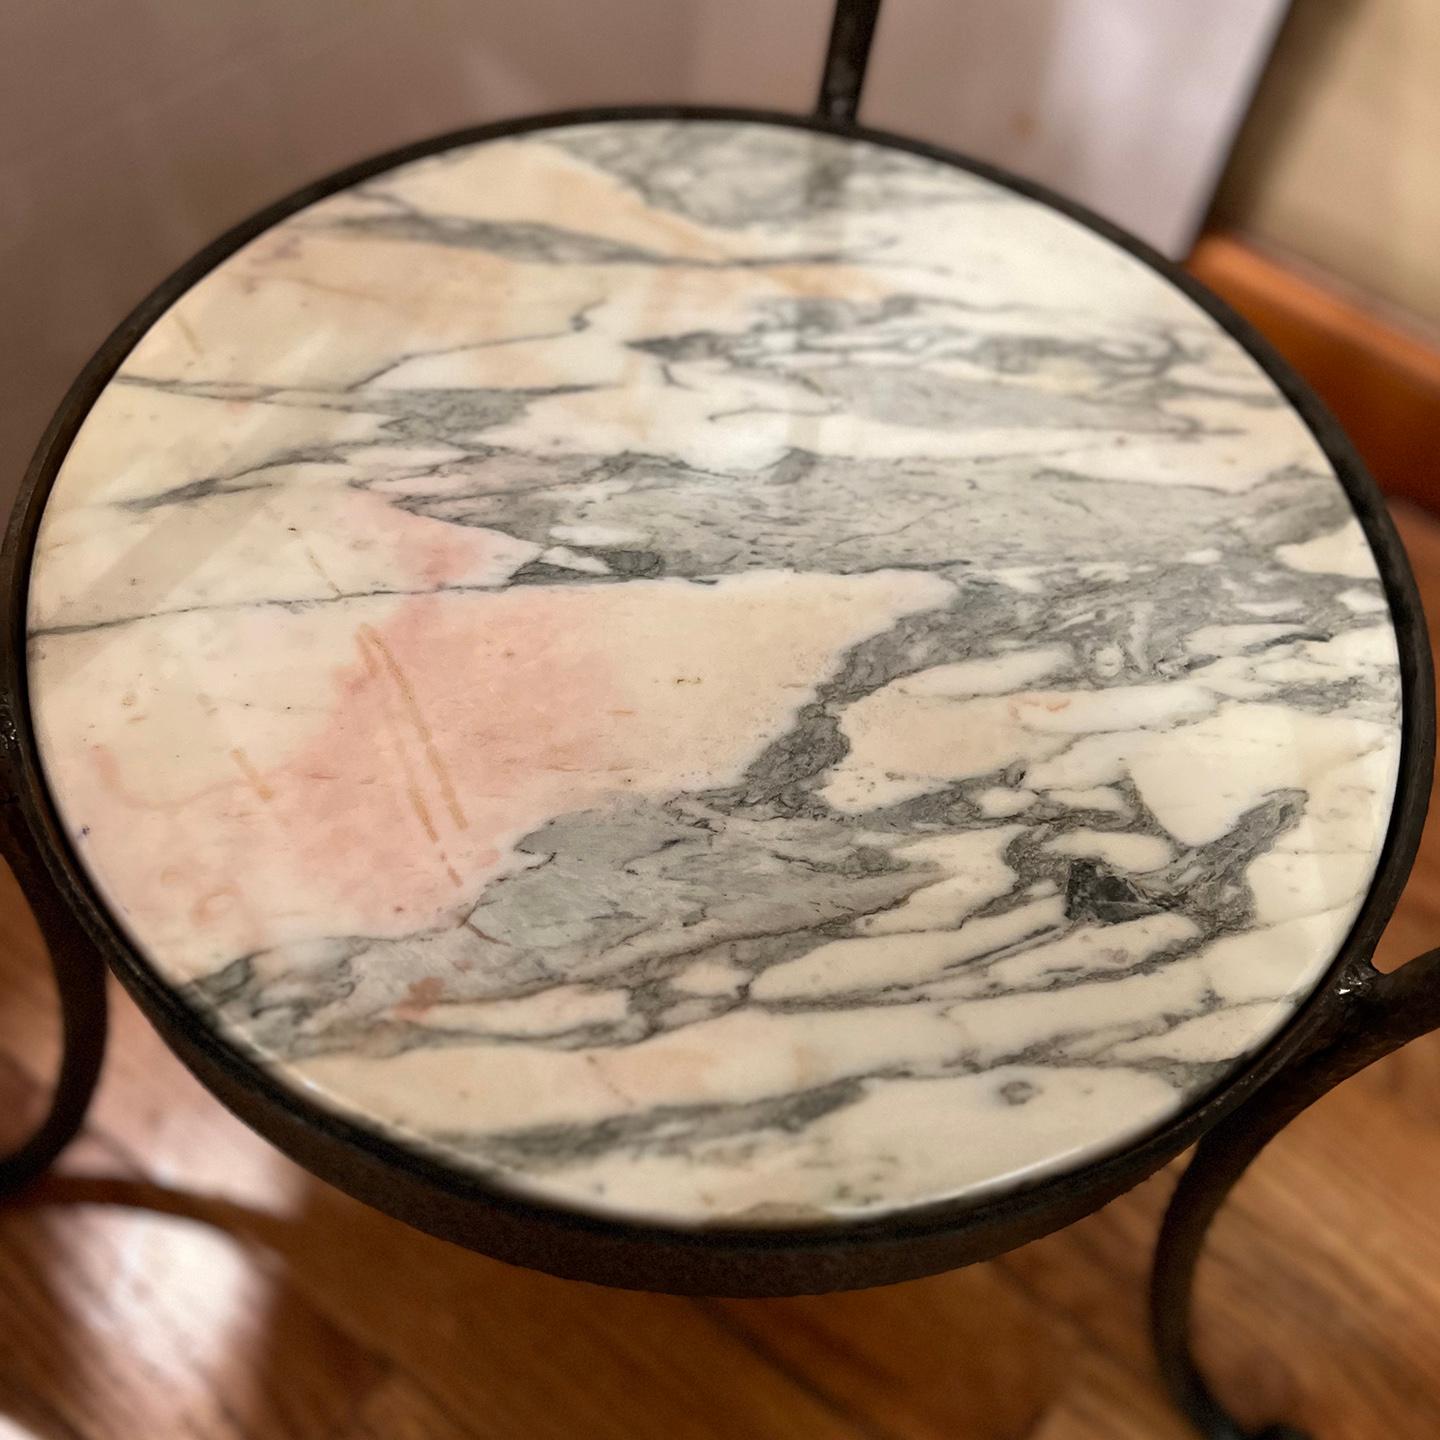 Pair of Italian 1950s hammered iron side tables with white and gray marble insets.

Measurements:
Height:25.25?
Diameter:24?.